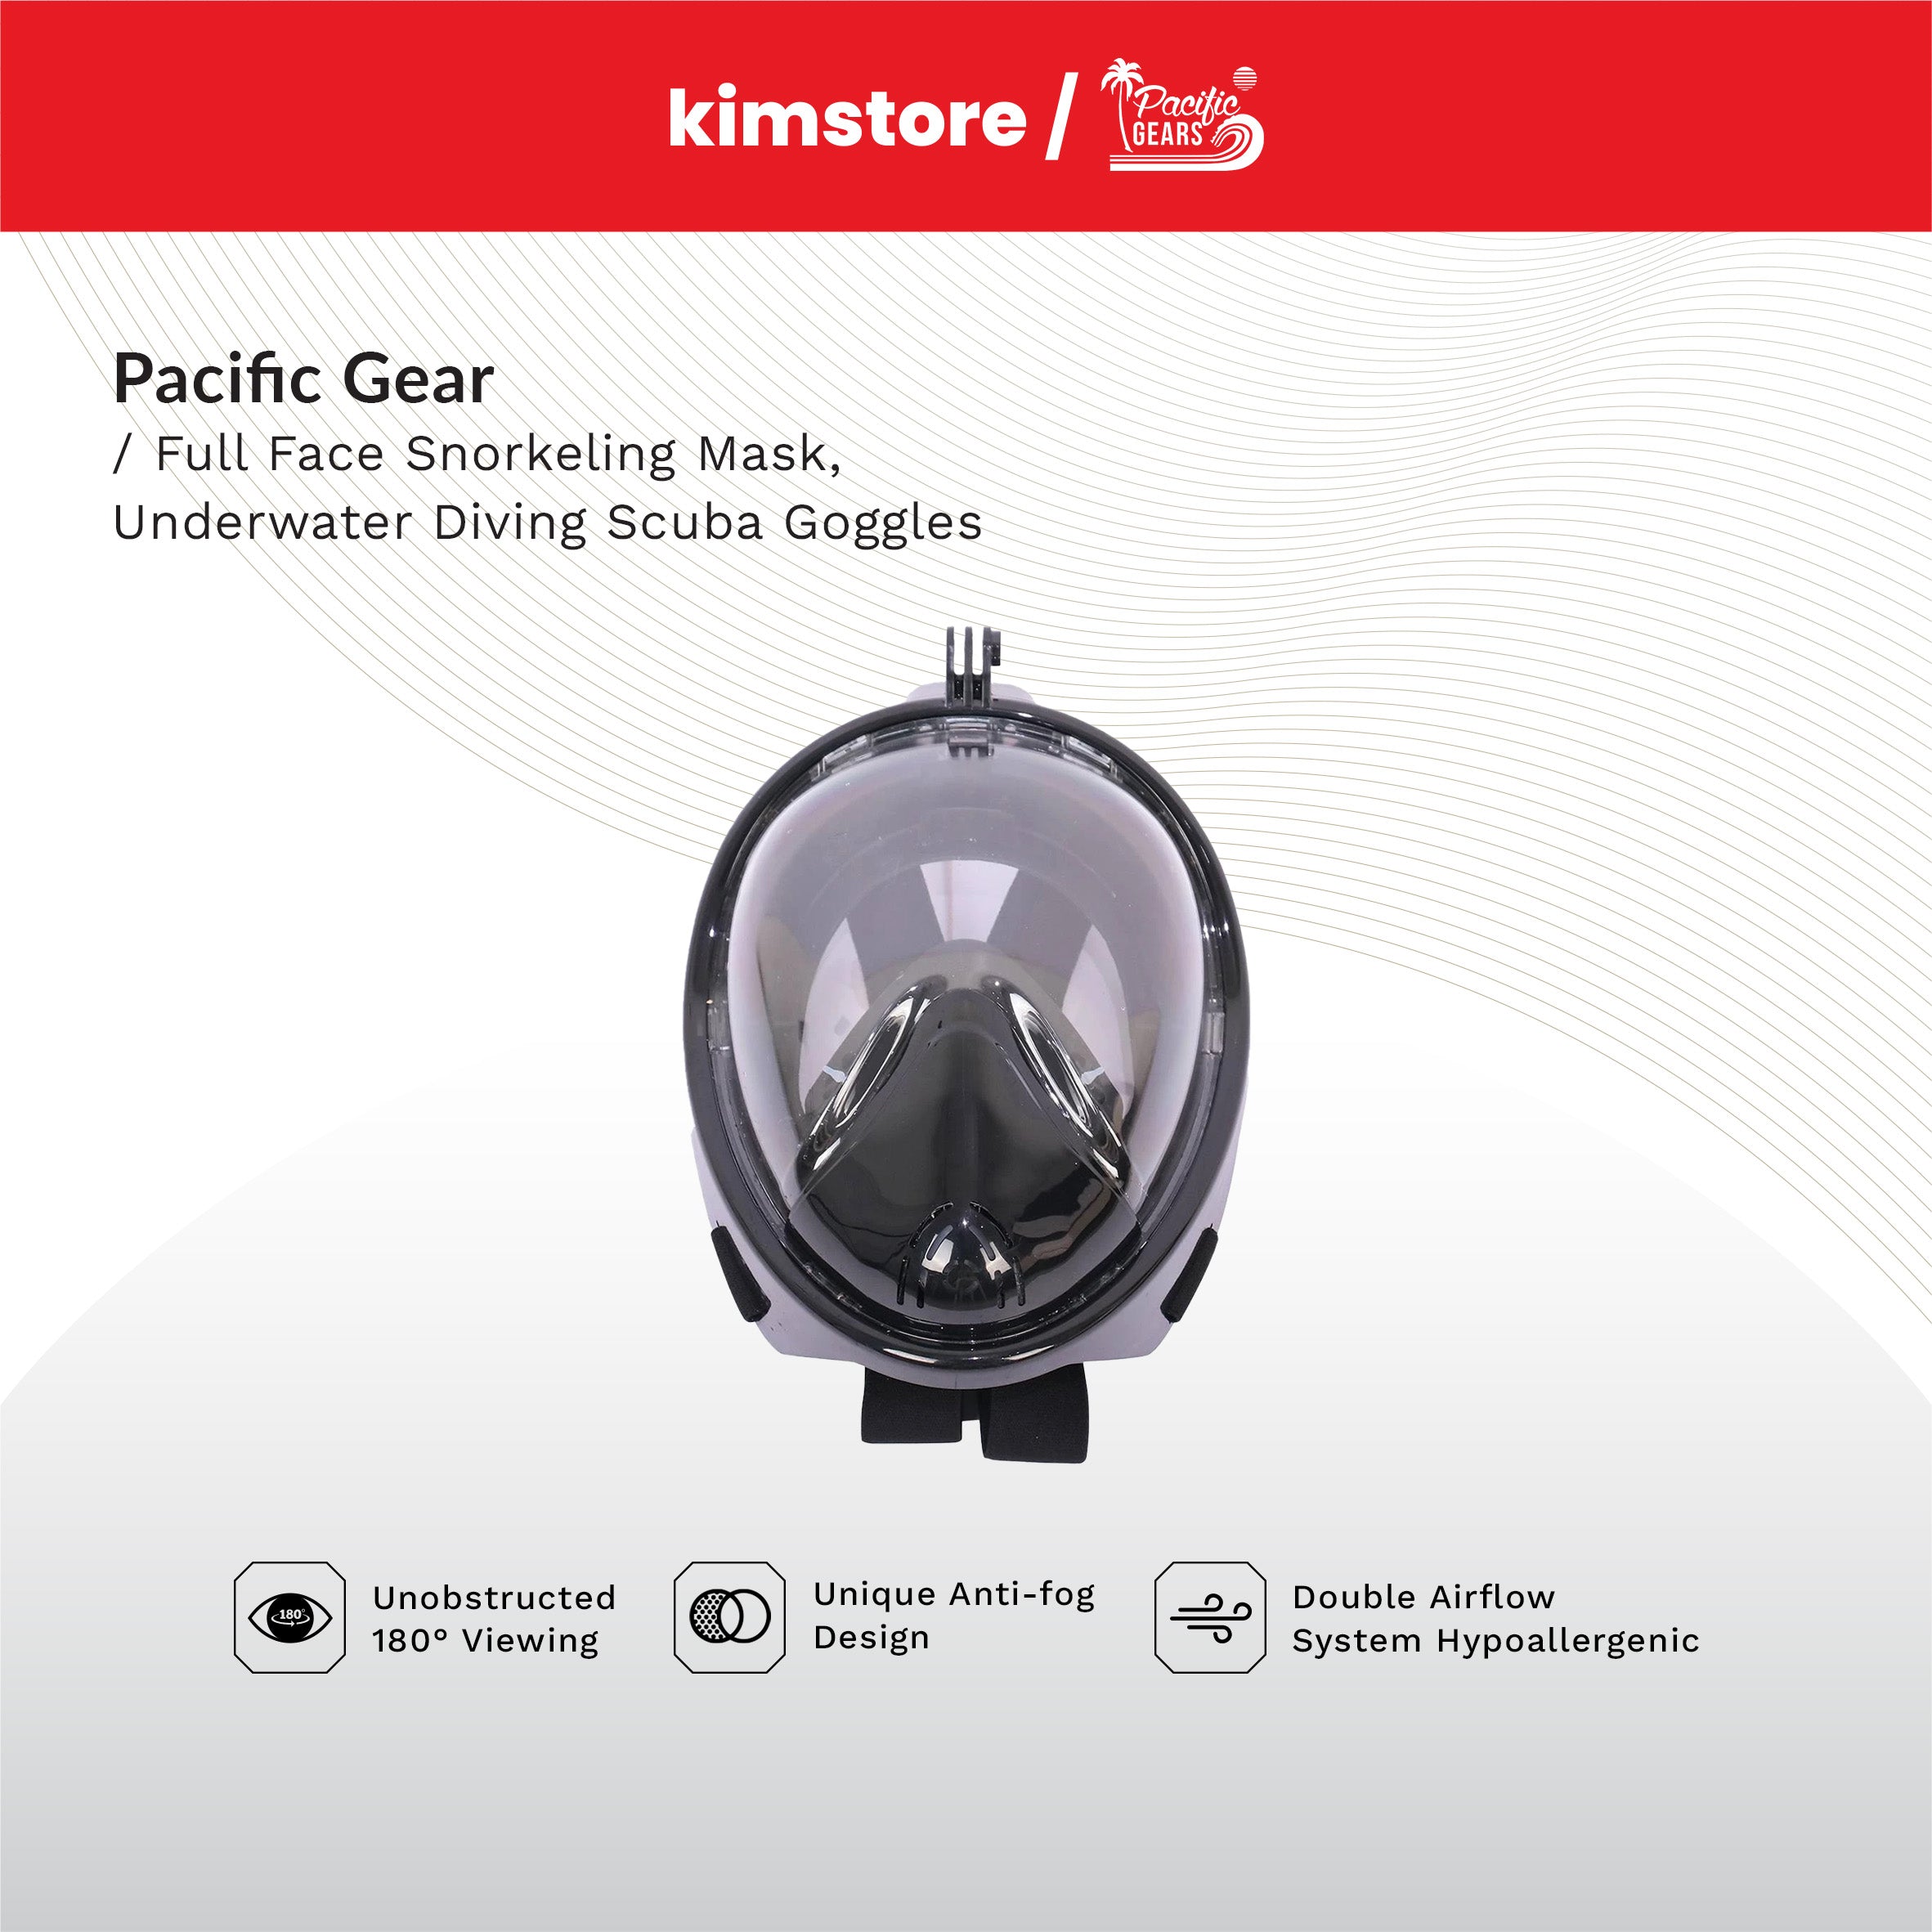 PACIFIC GEARS Full Face Snorkeling Mask